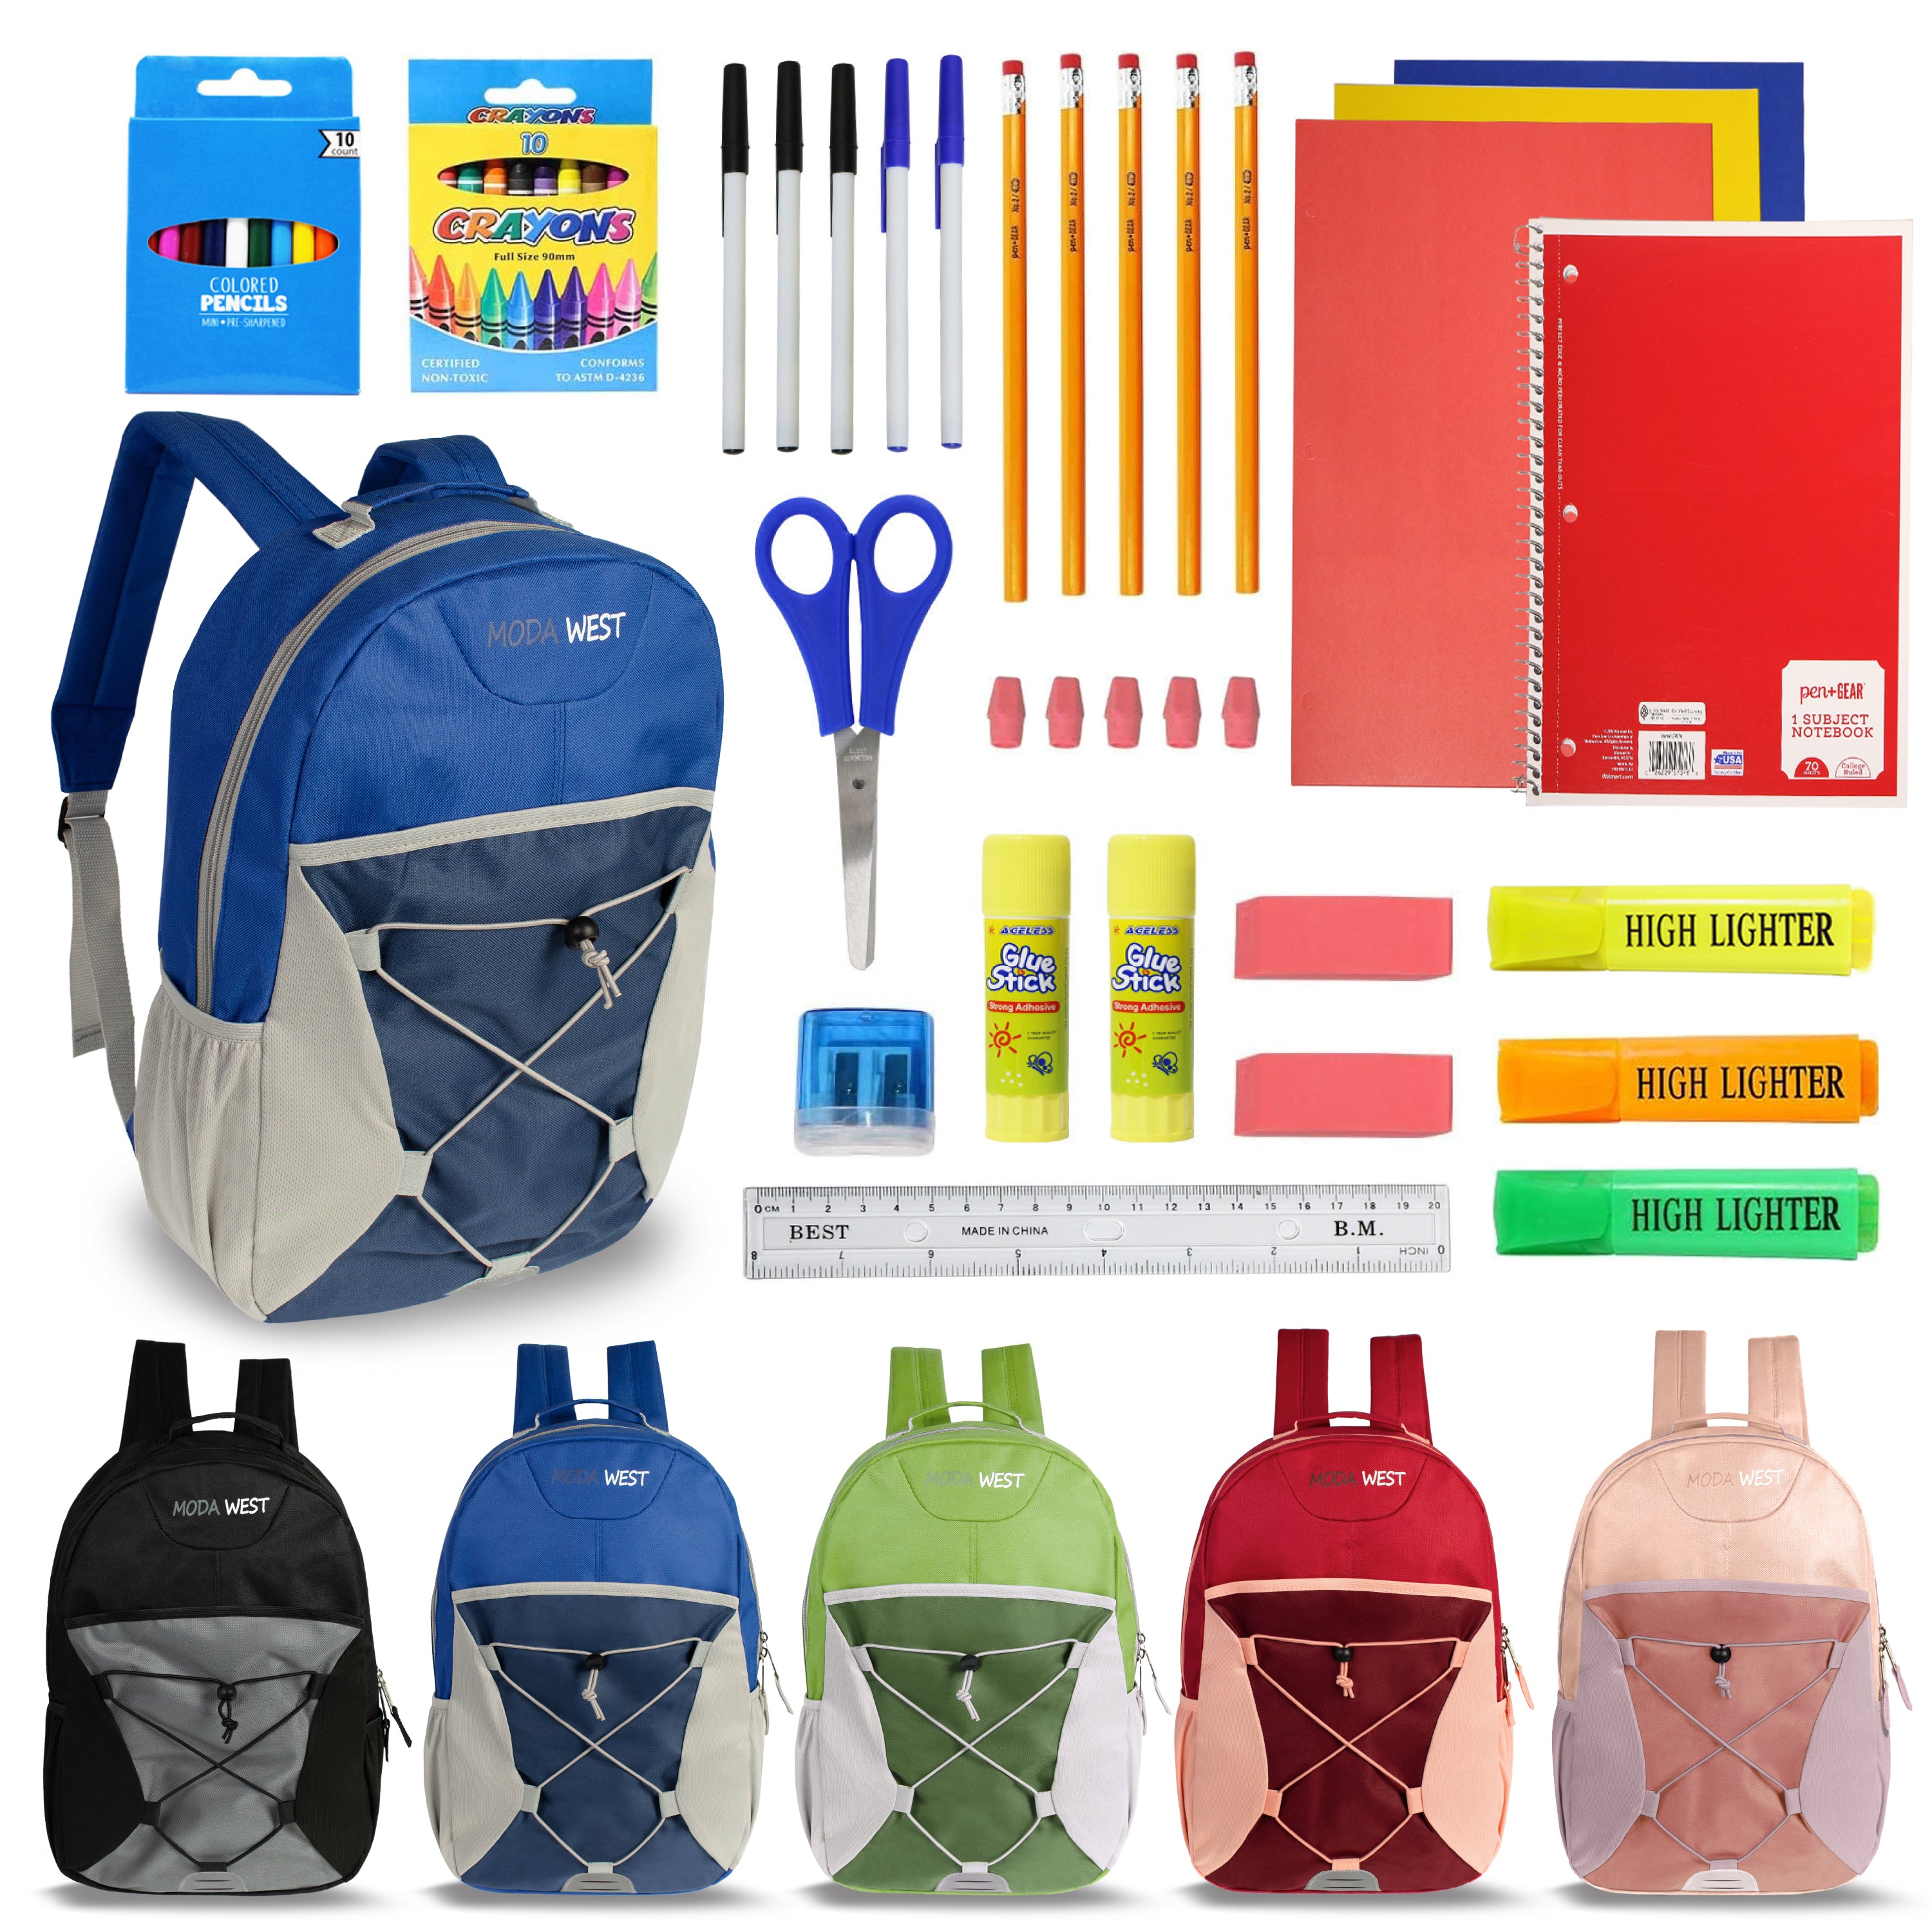 17 Inch Bulk Backpacks in Assorted Colors with School Supply Kits Wholesale - Kit of 12